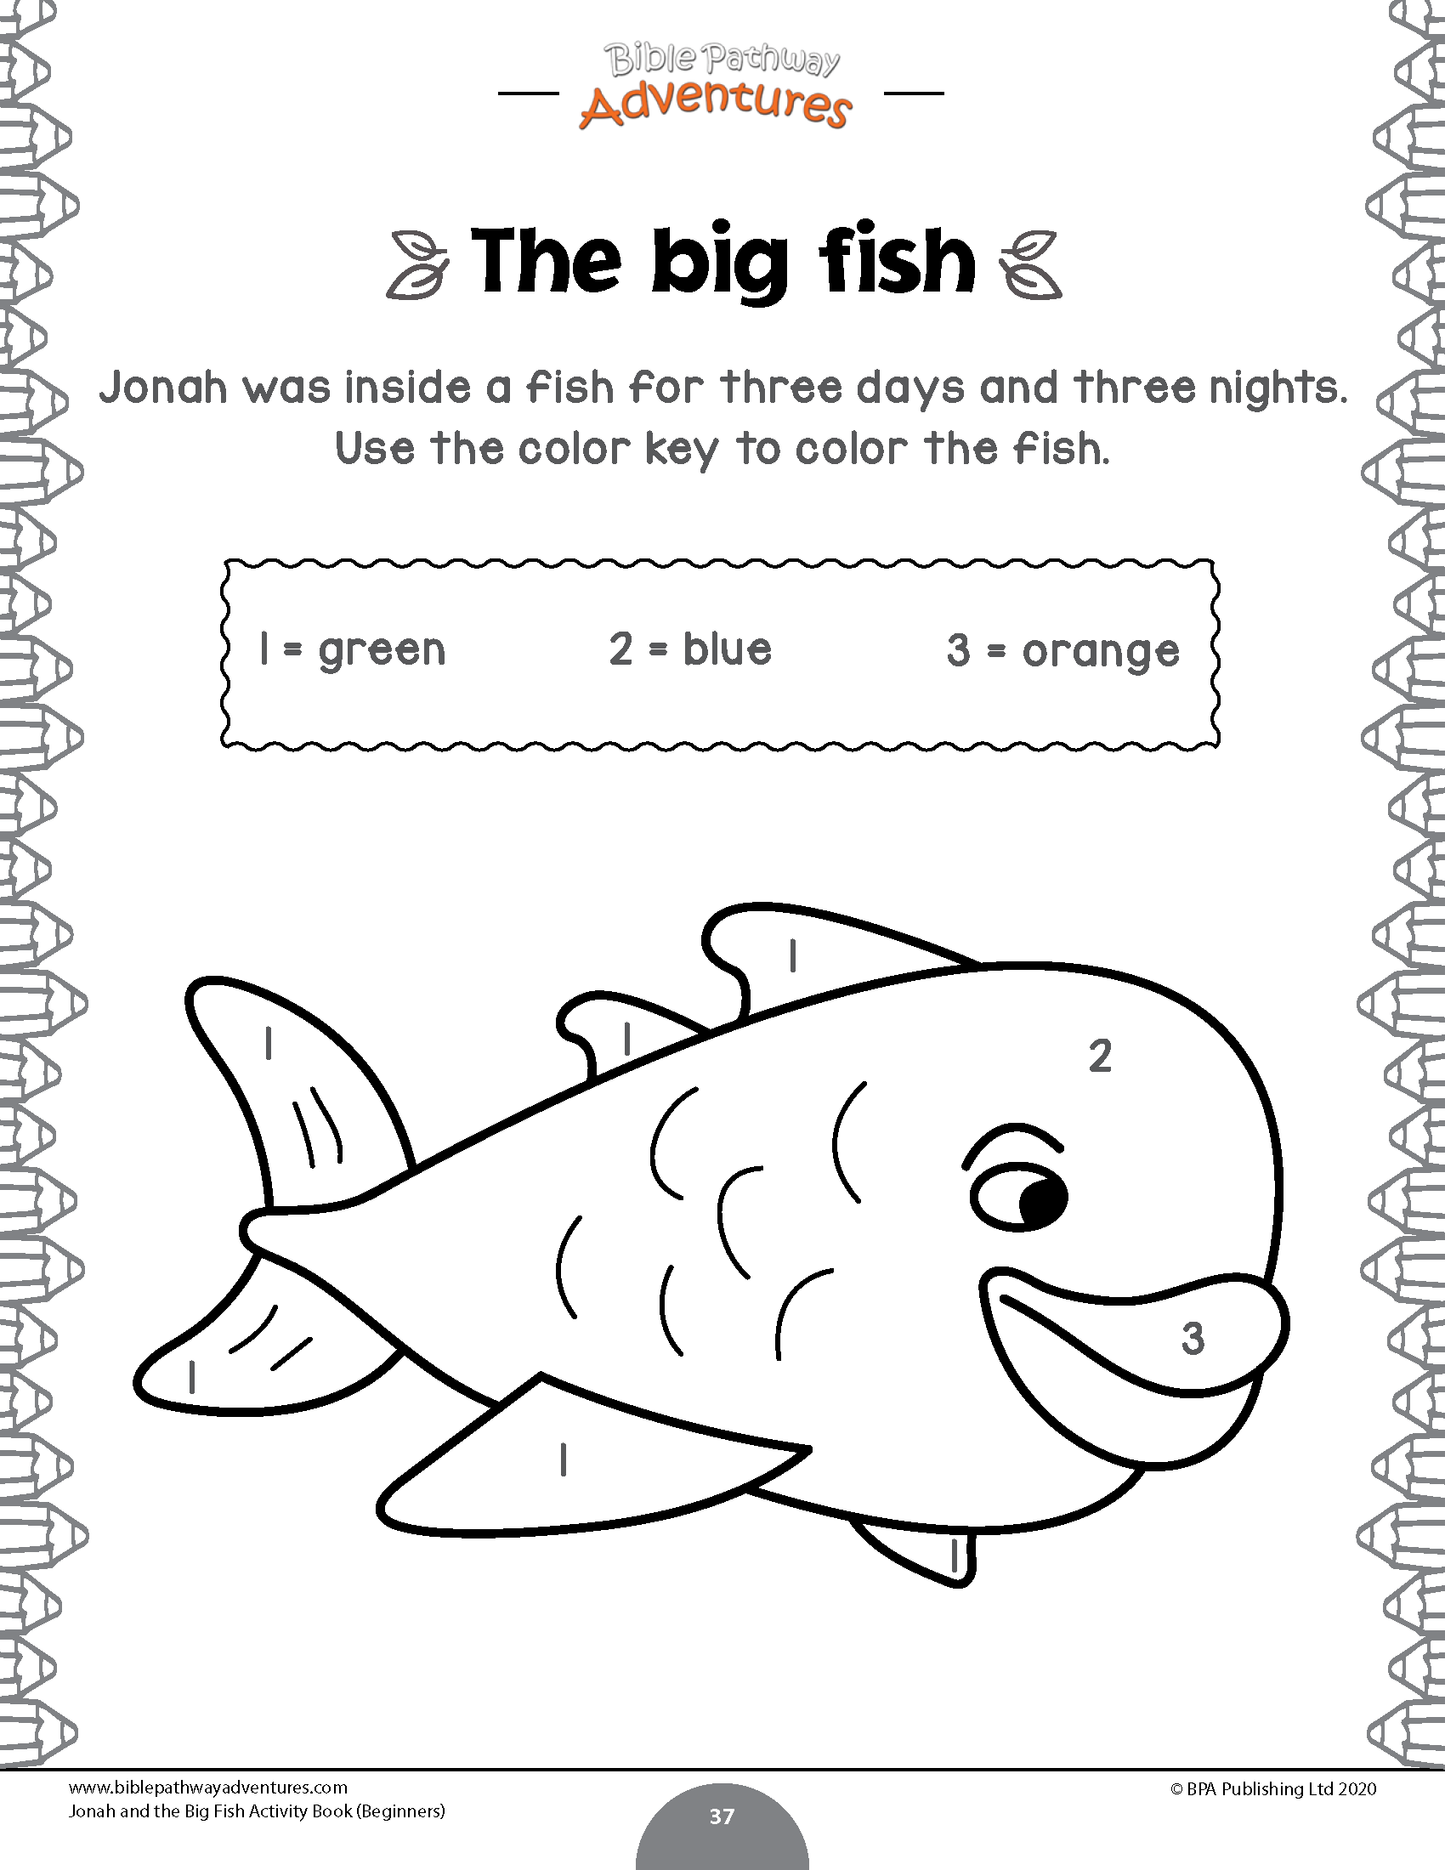 Jonah and the Big Fish Activity Book for Beginners (paperback)